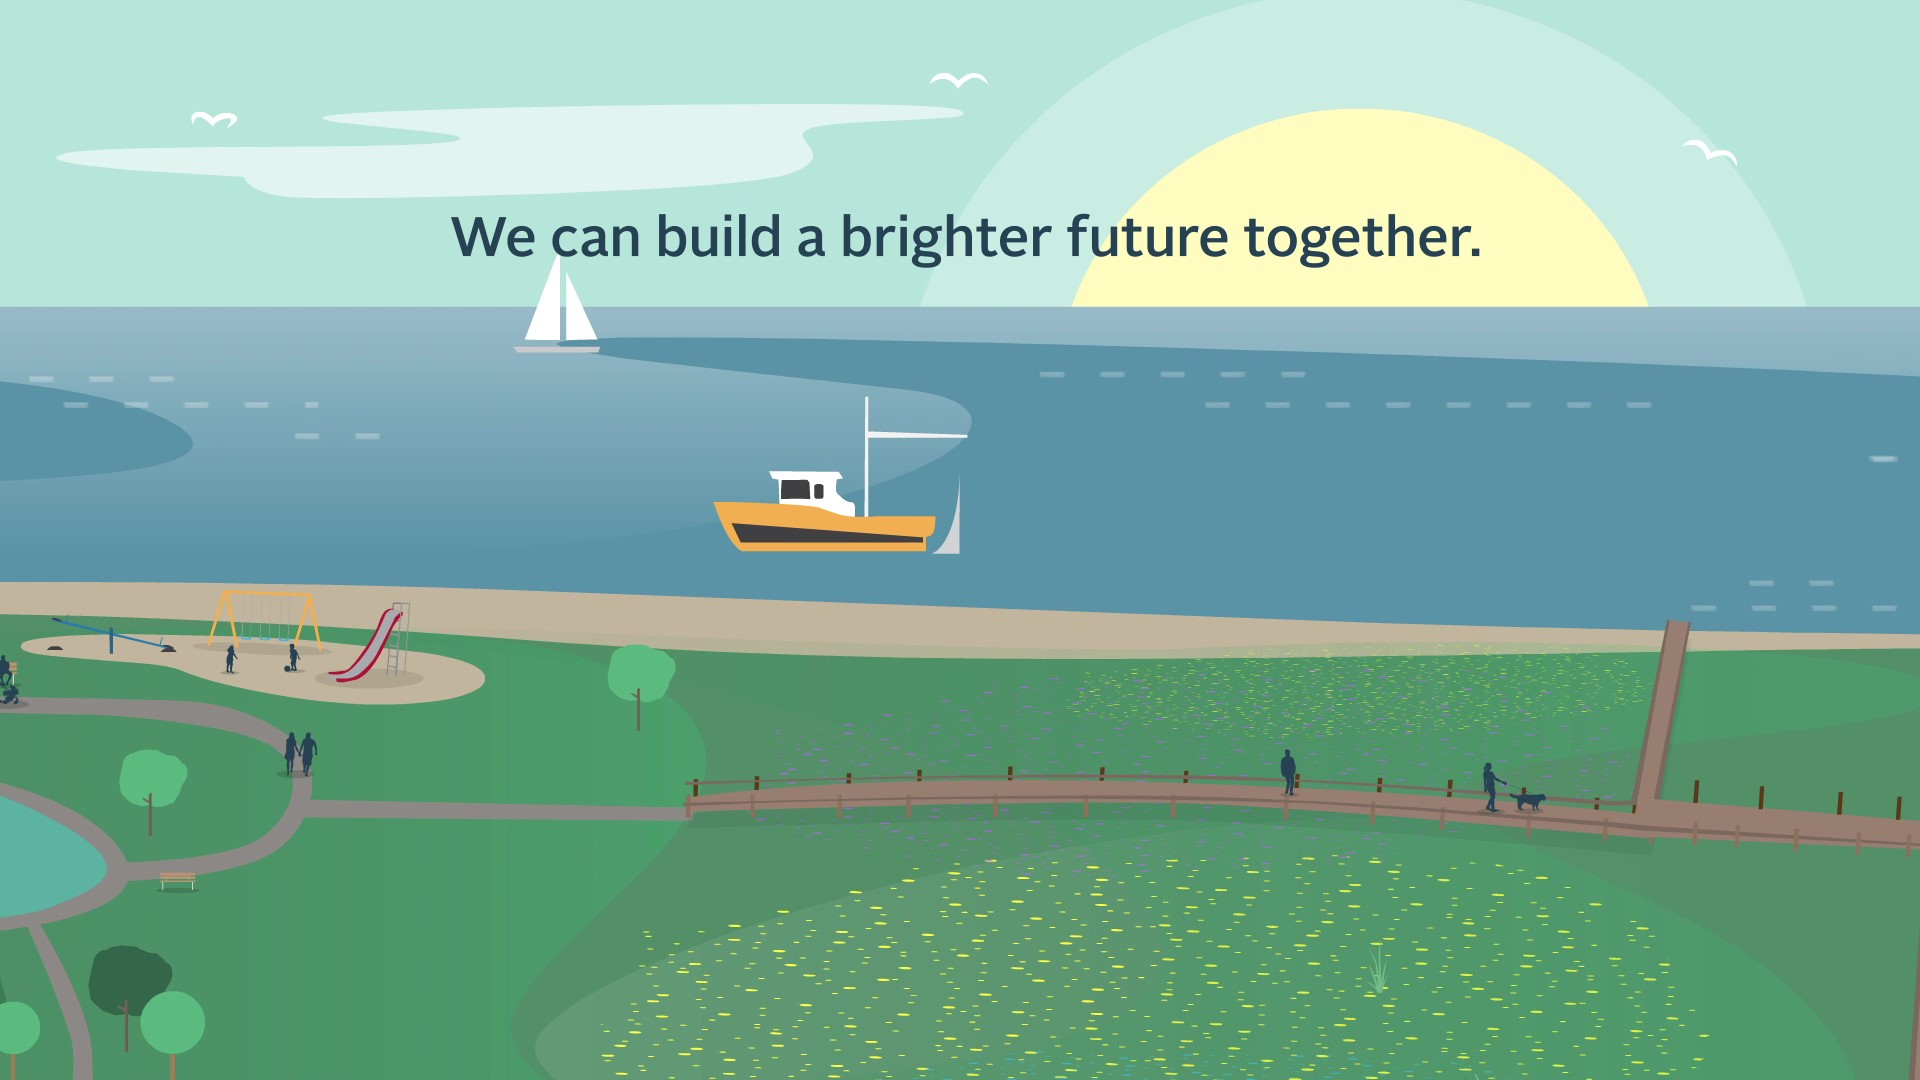 Graphic of a shoreline landscape with two boats out in the water. The sun is setting in the background and the words "We can build a brighter future together" are typed across the sky.